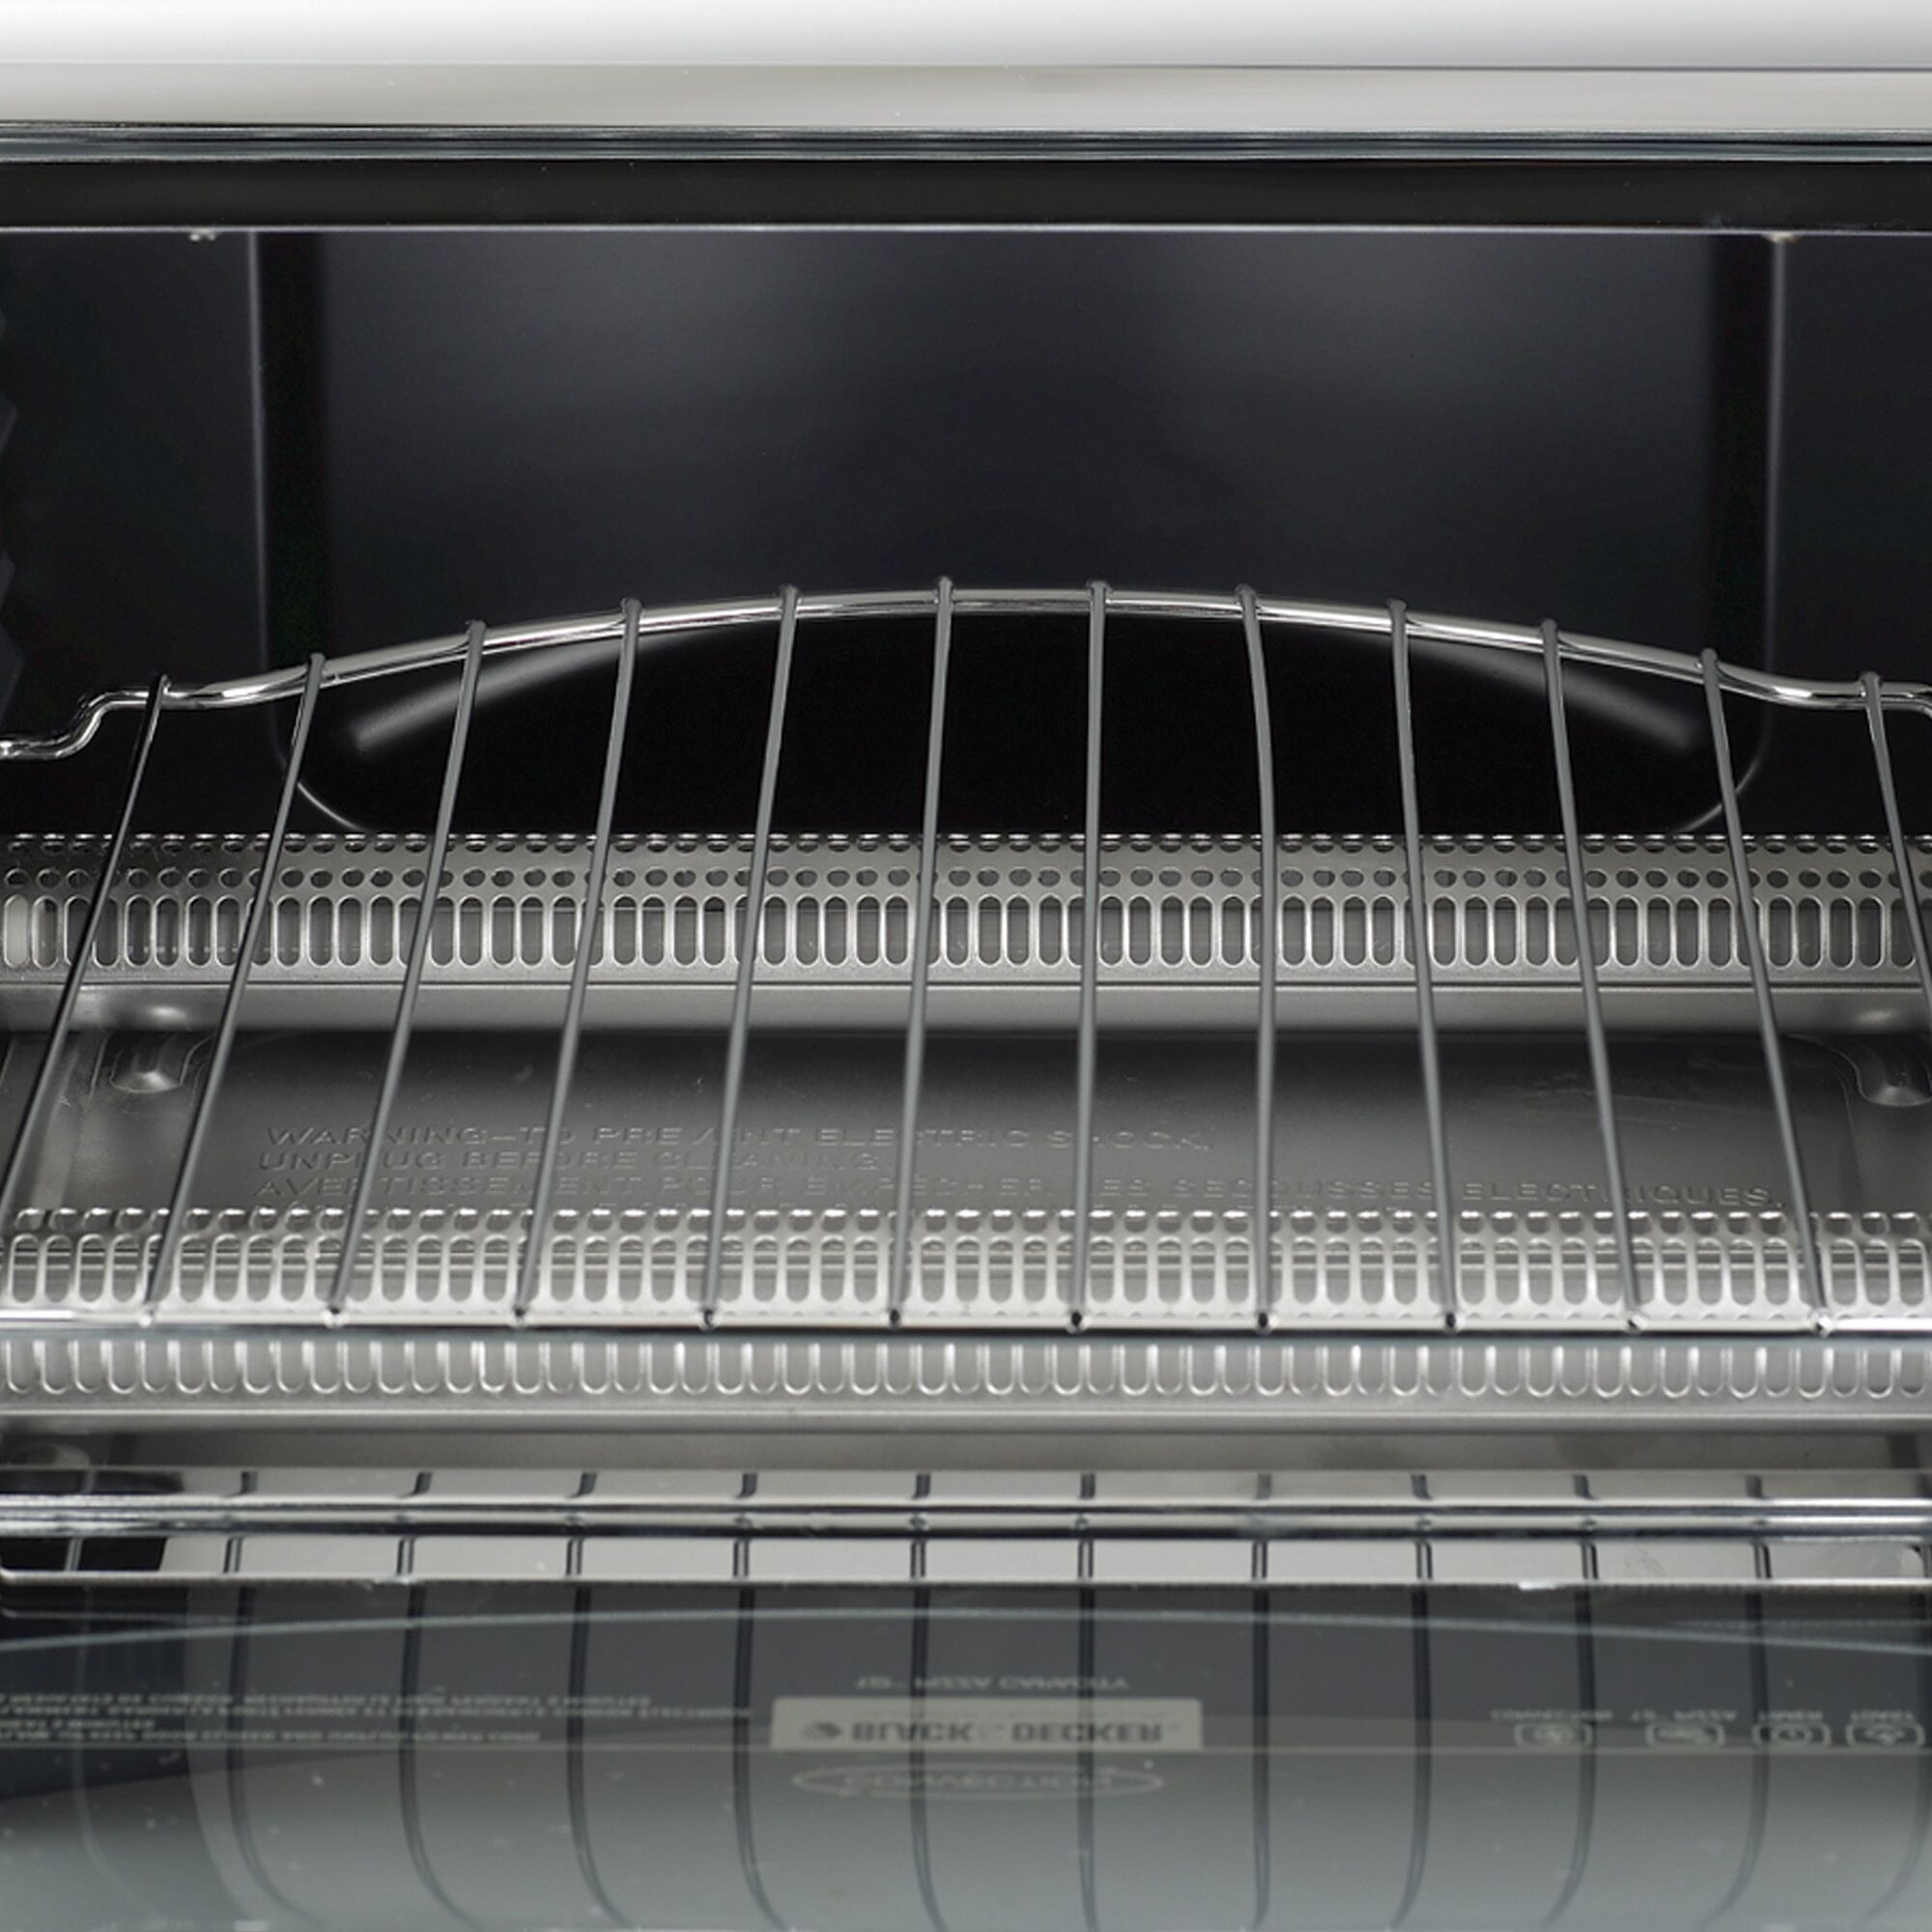 Profile of 6 slice convection toaster oven.